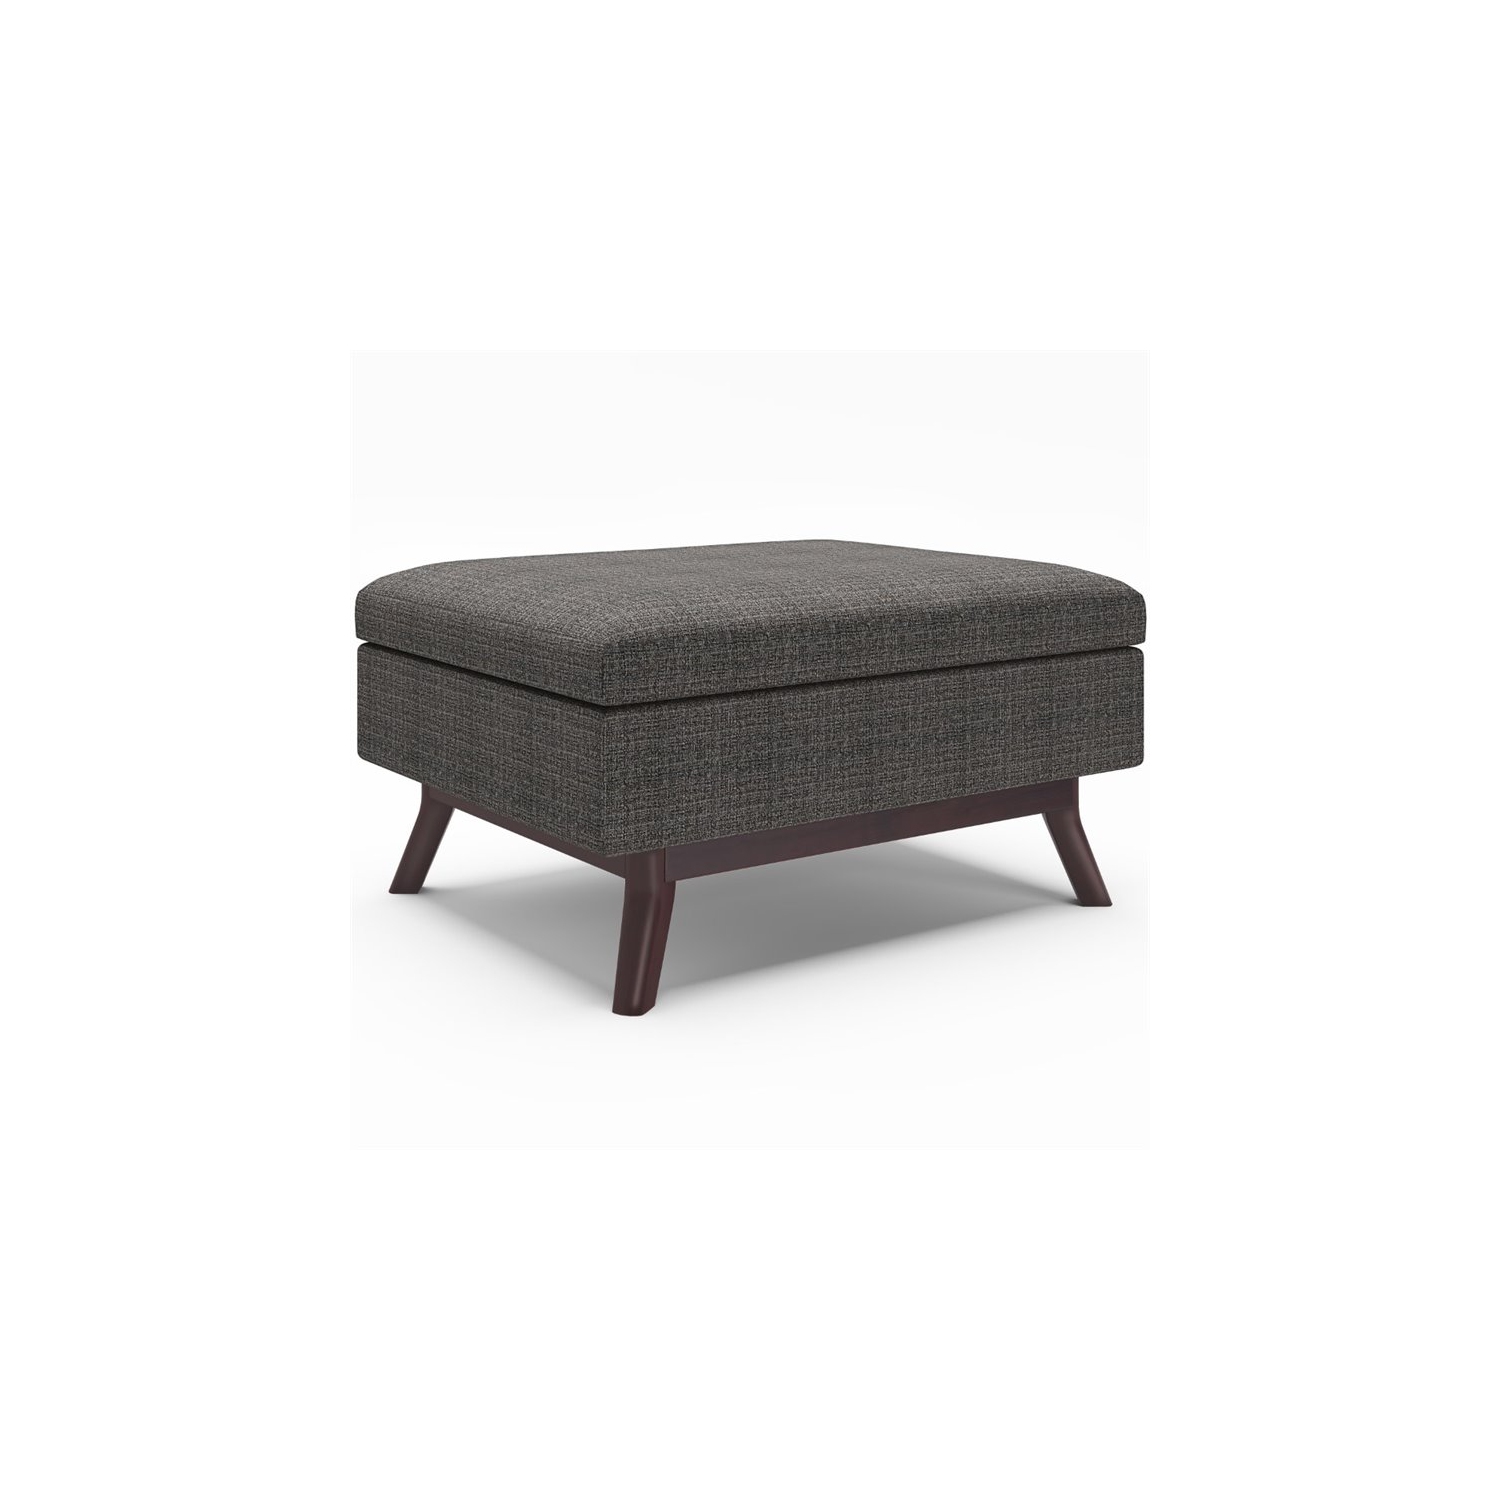 Simpli Home Owen 36" Square Upholstered Modern Coffee Table Ottoman in Ebony